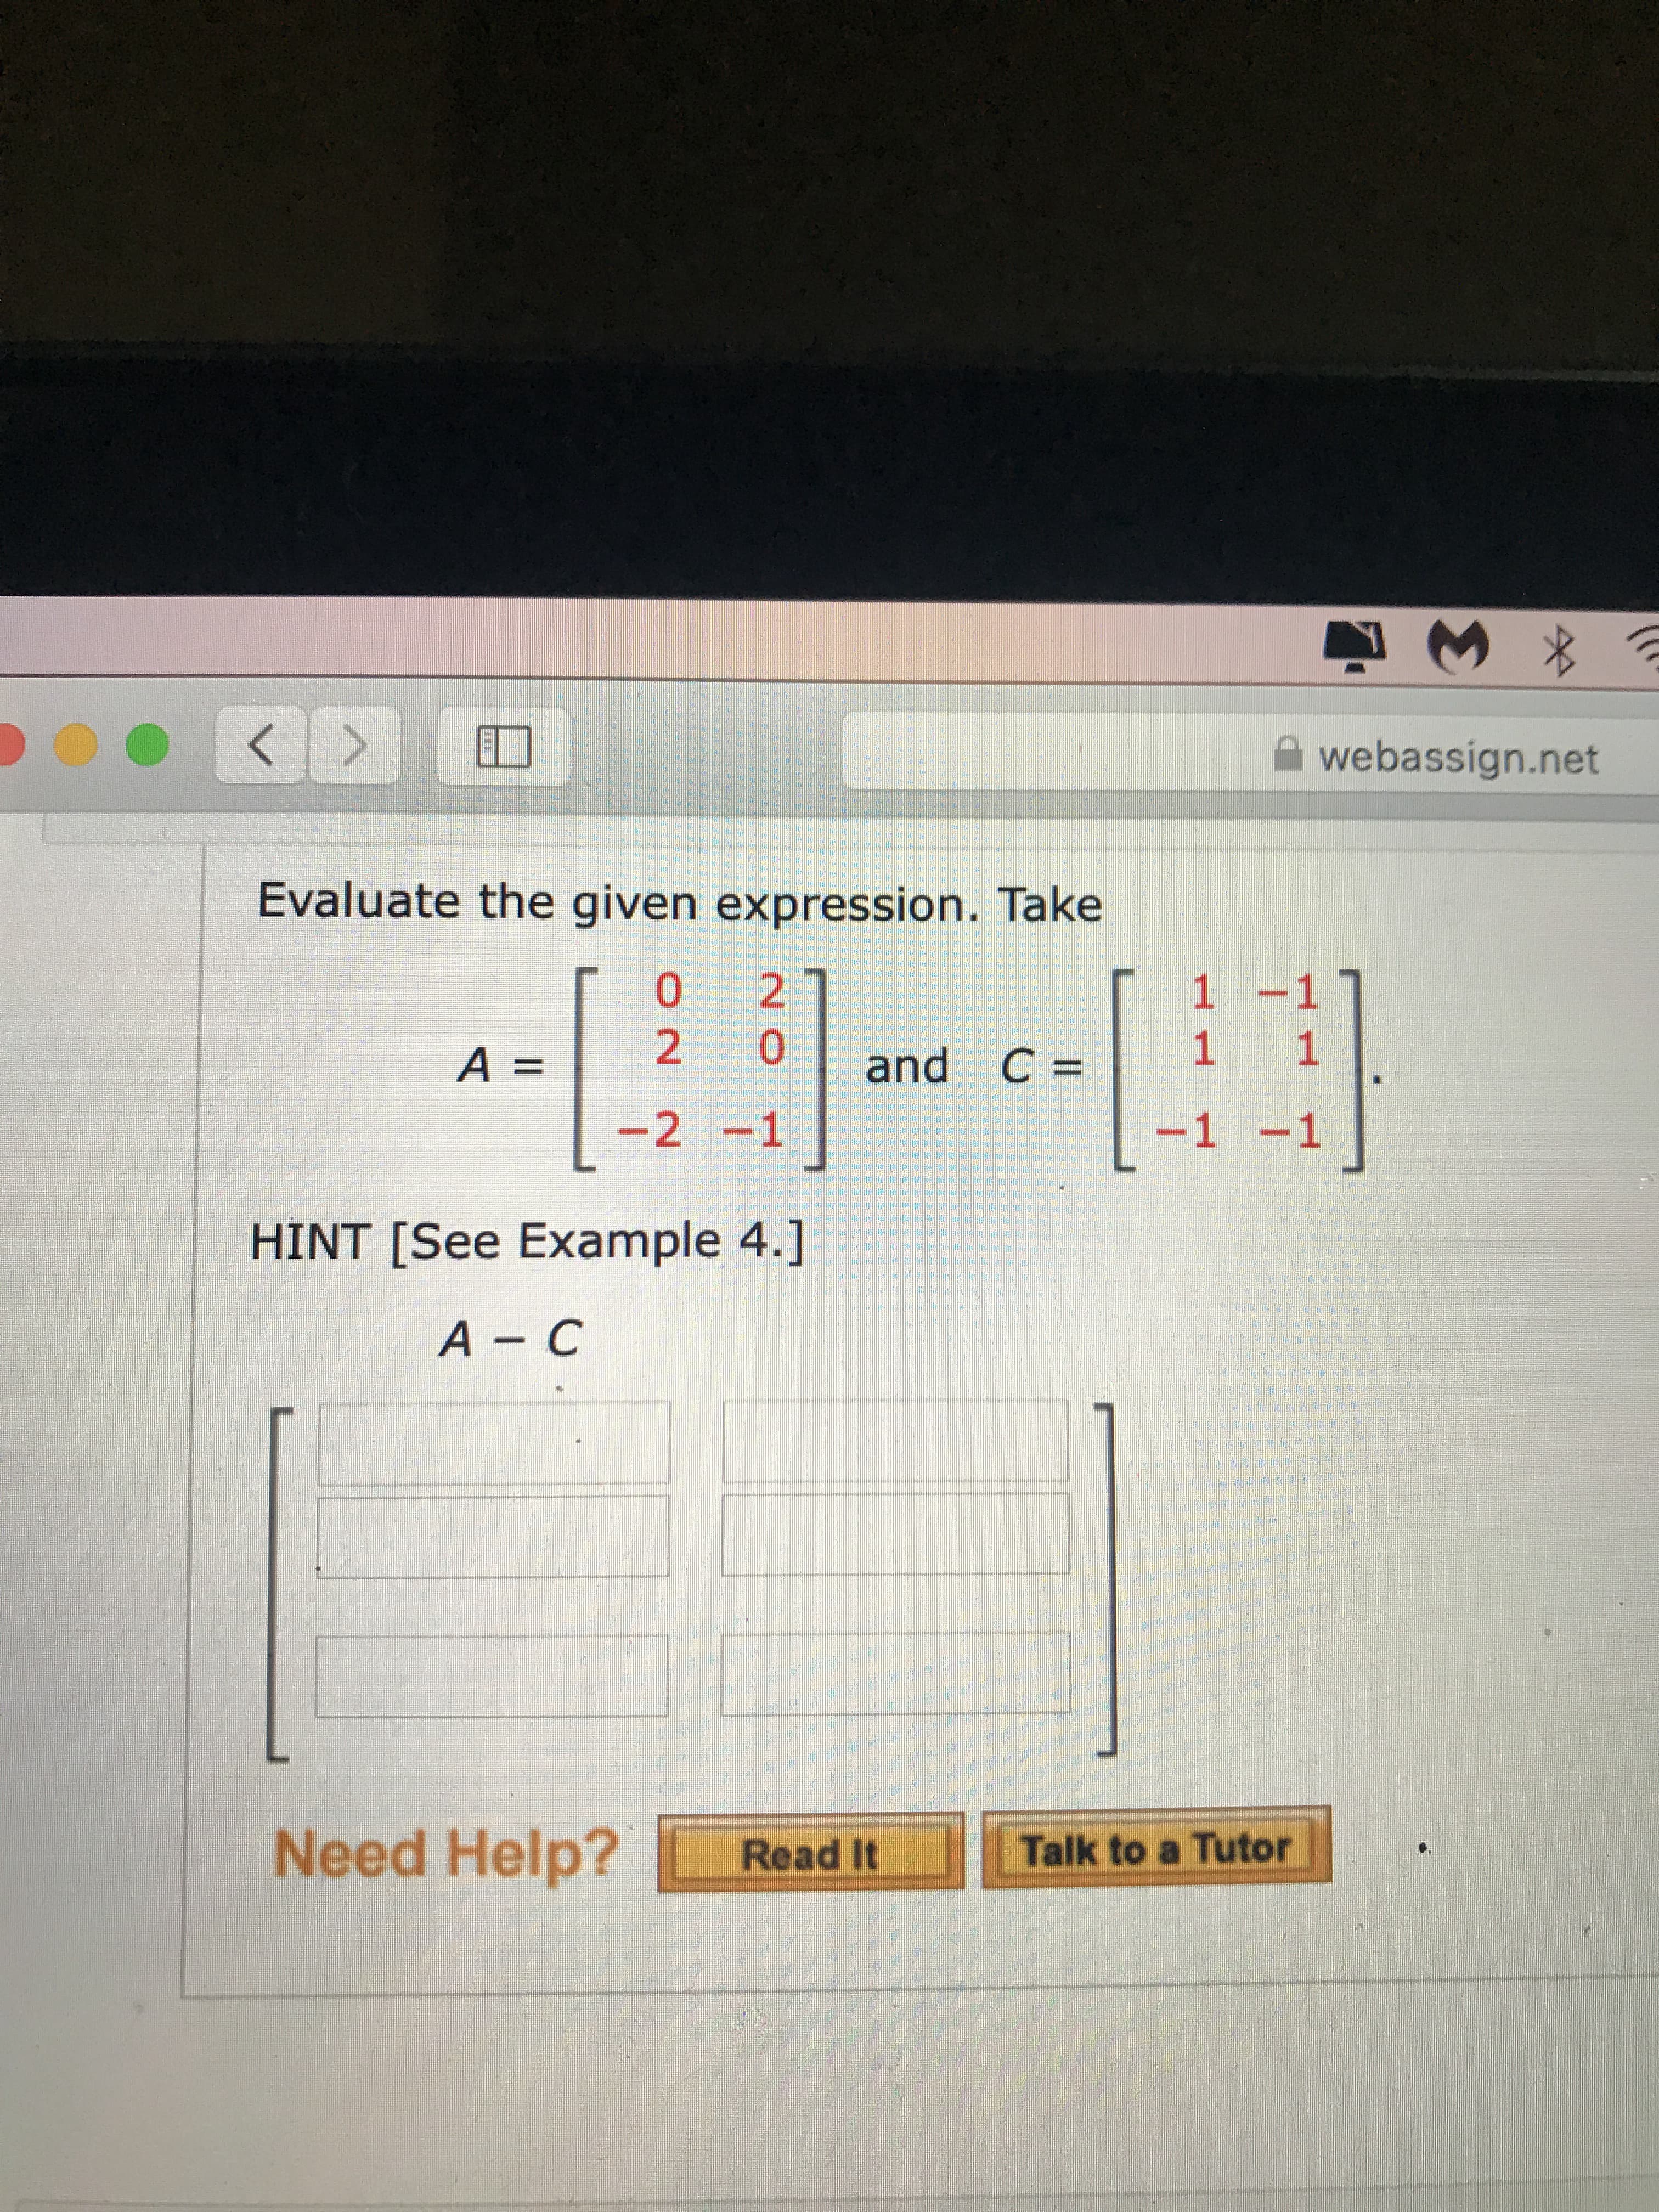 Evaluate the given expression. Take
27
1 -1
A =
2.
and C =
1 1
-2 -1
-1 -1
